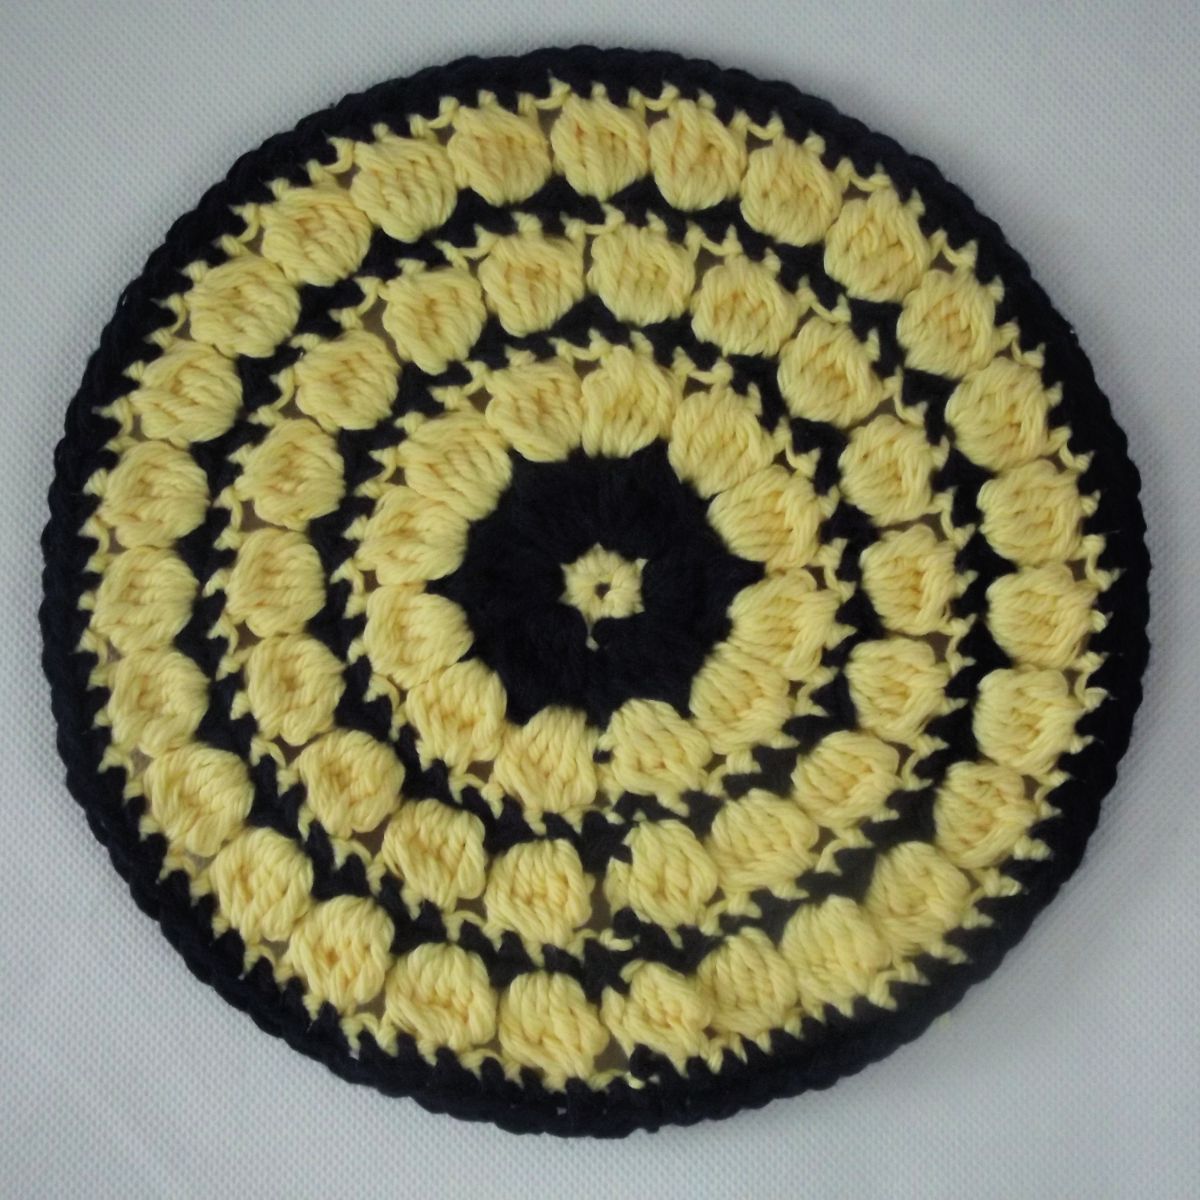 Round black crochet circle with clusters of yellow rows around the design and one small yellow center on a white background.